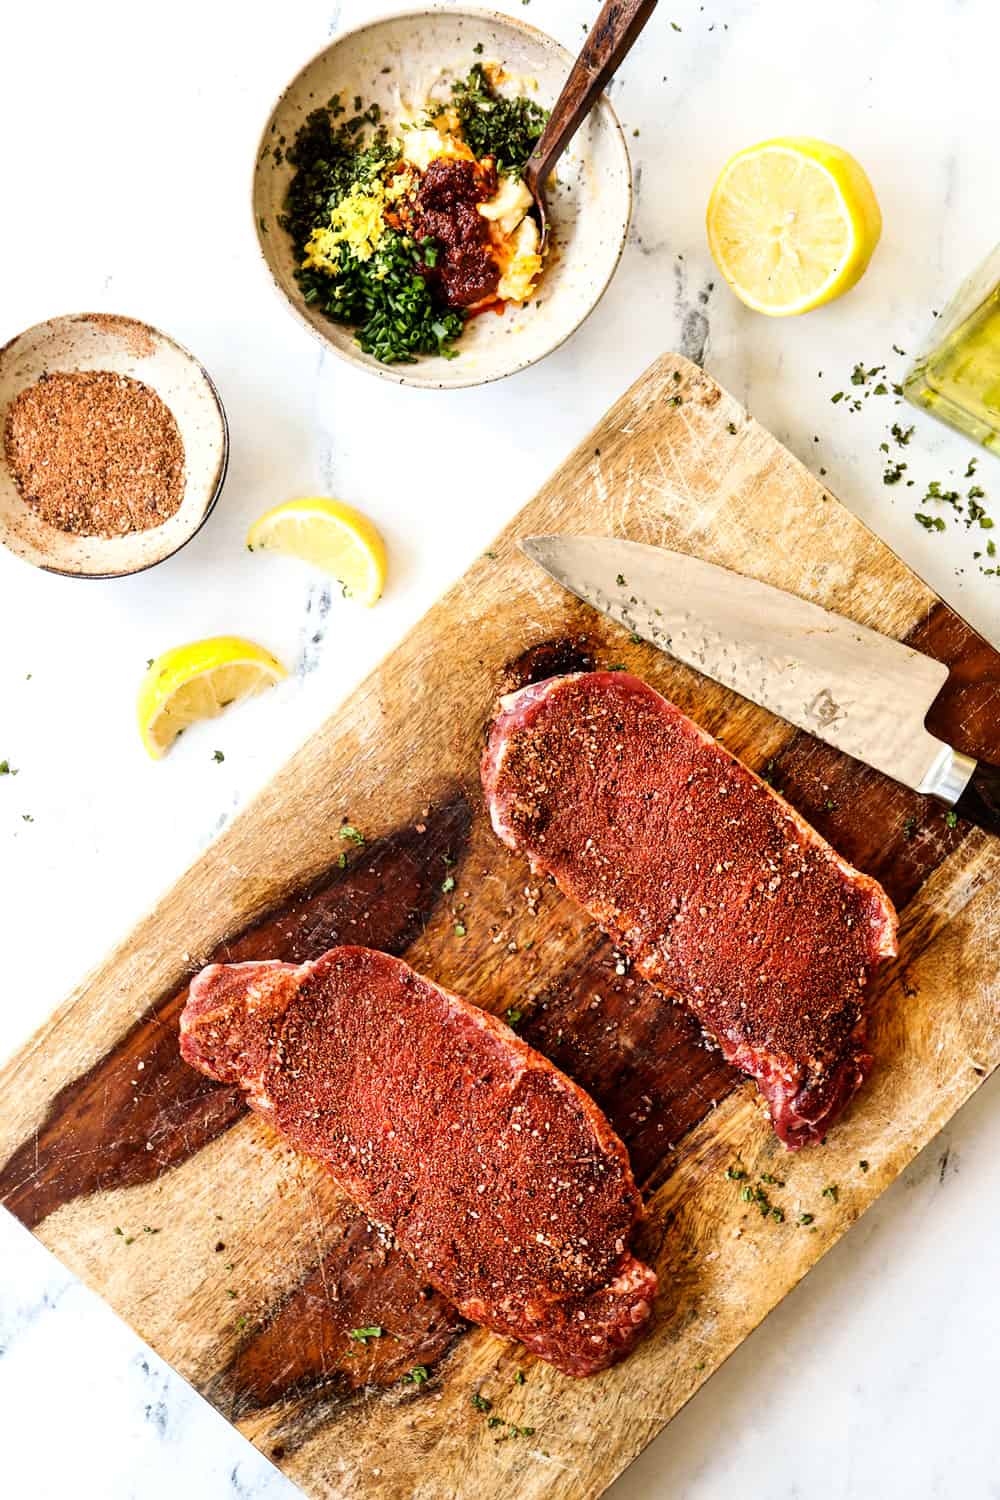 showing how to make New York Strip Steak (Strip Steak, NY Strip Steak) with top view of recipe ingredients: strip steak, spice rub and compound butter